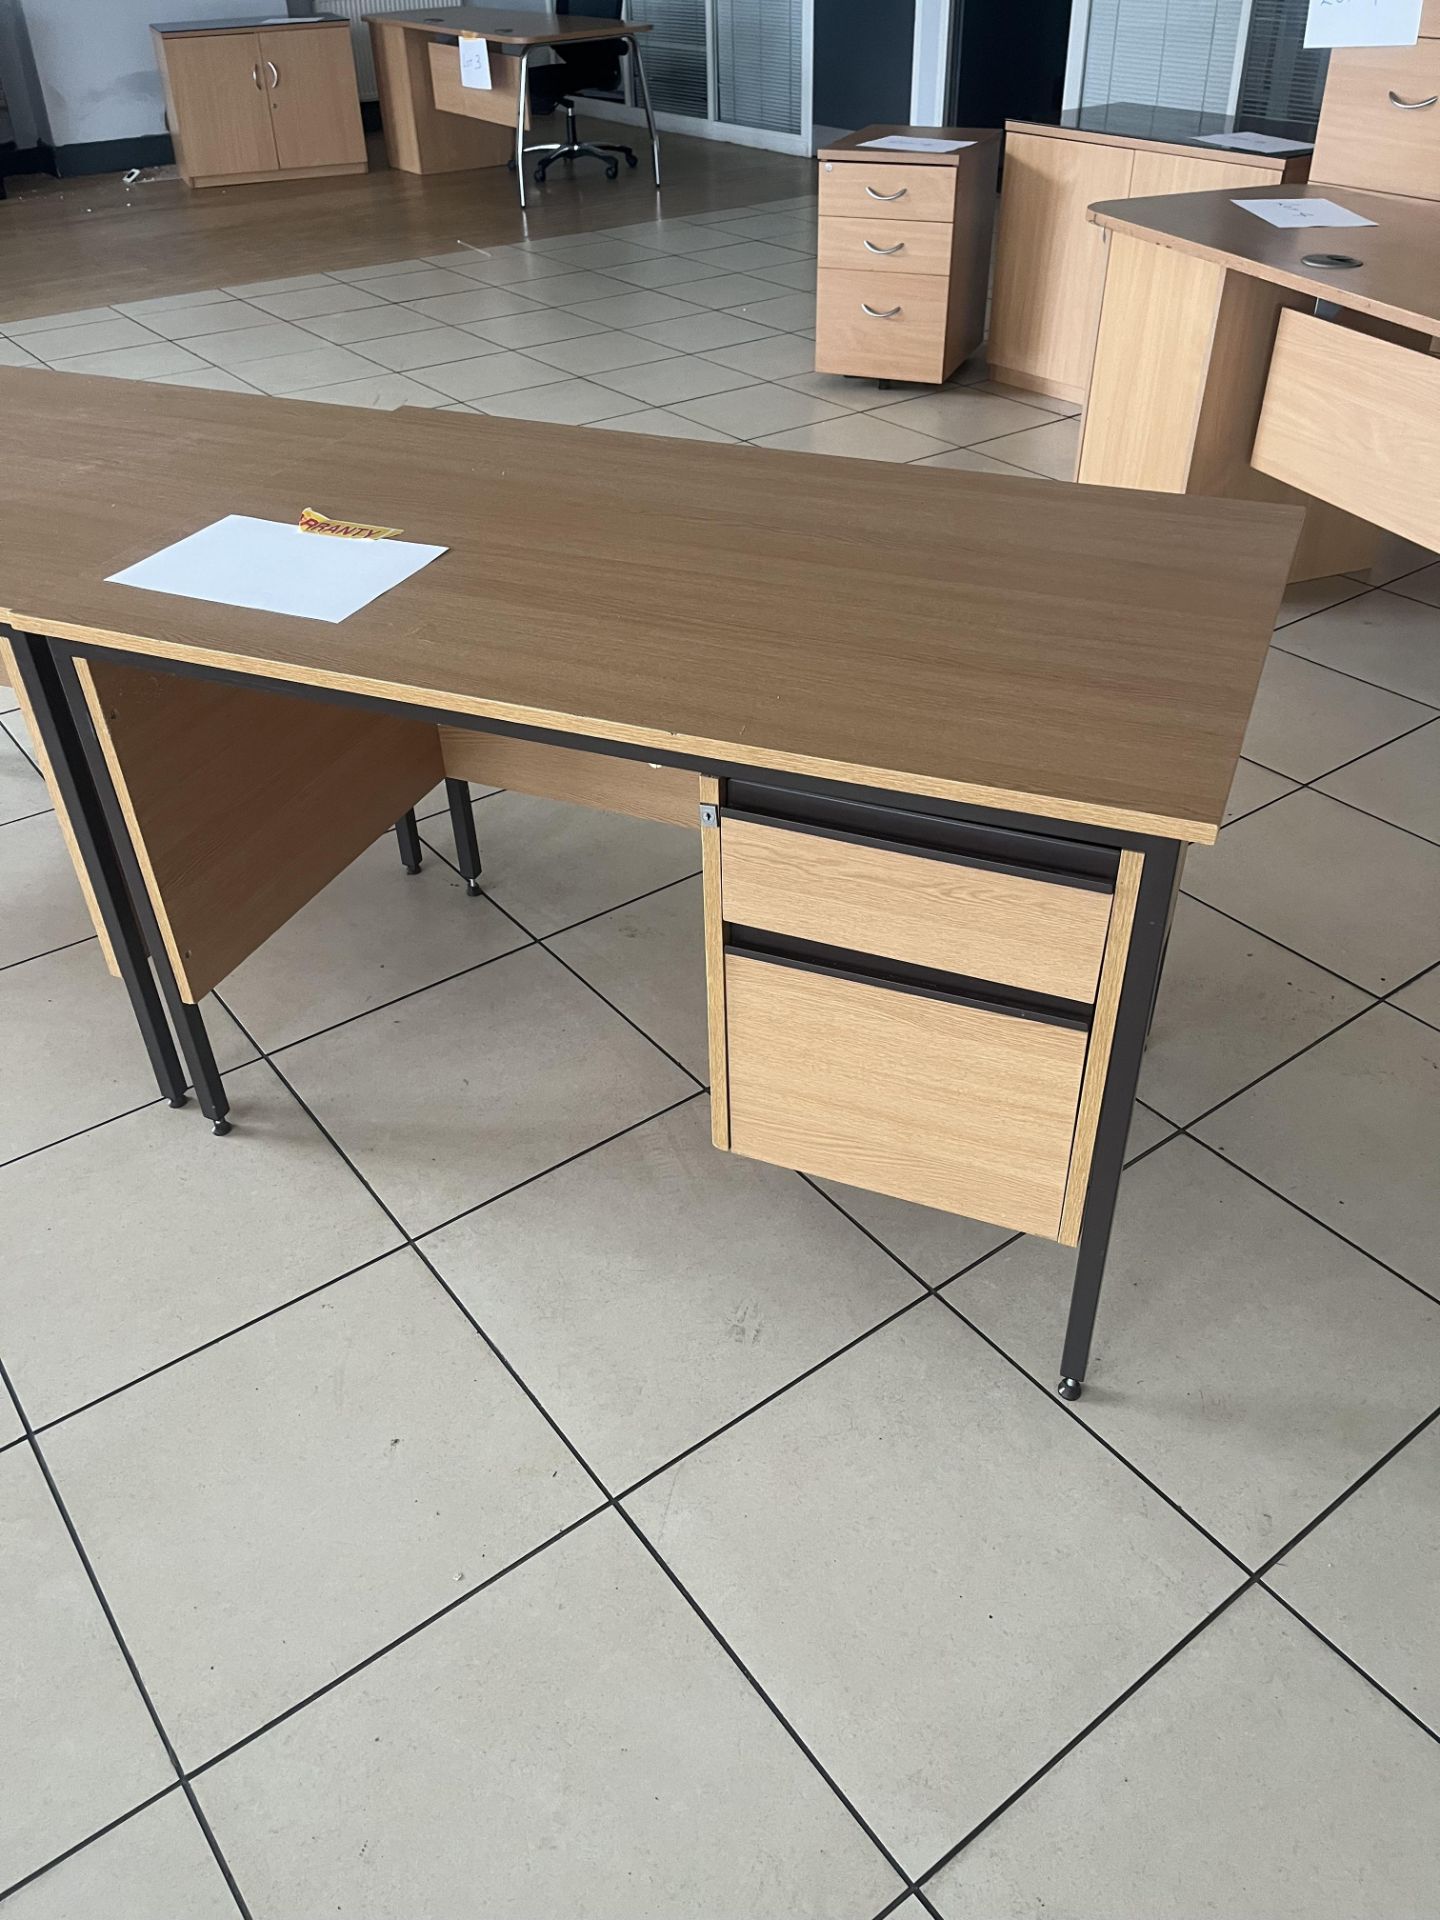 Two office desks, - Image 2 of 5